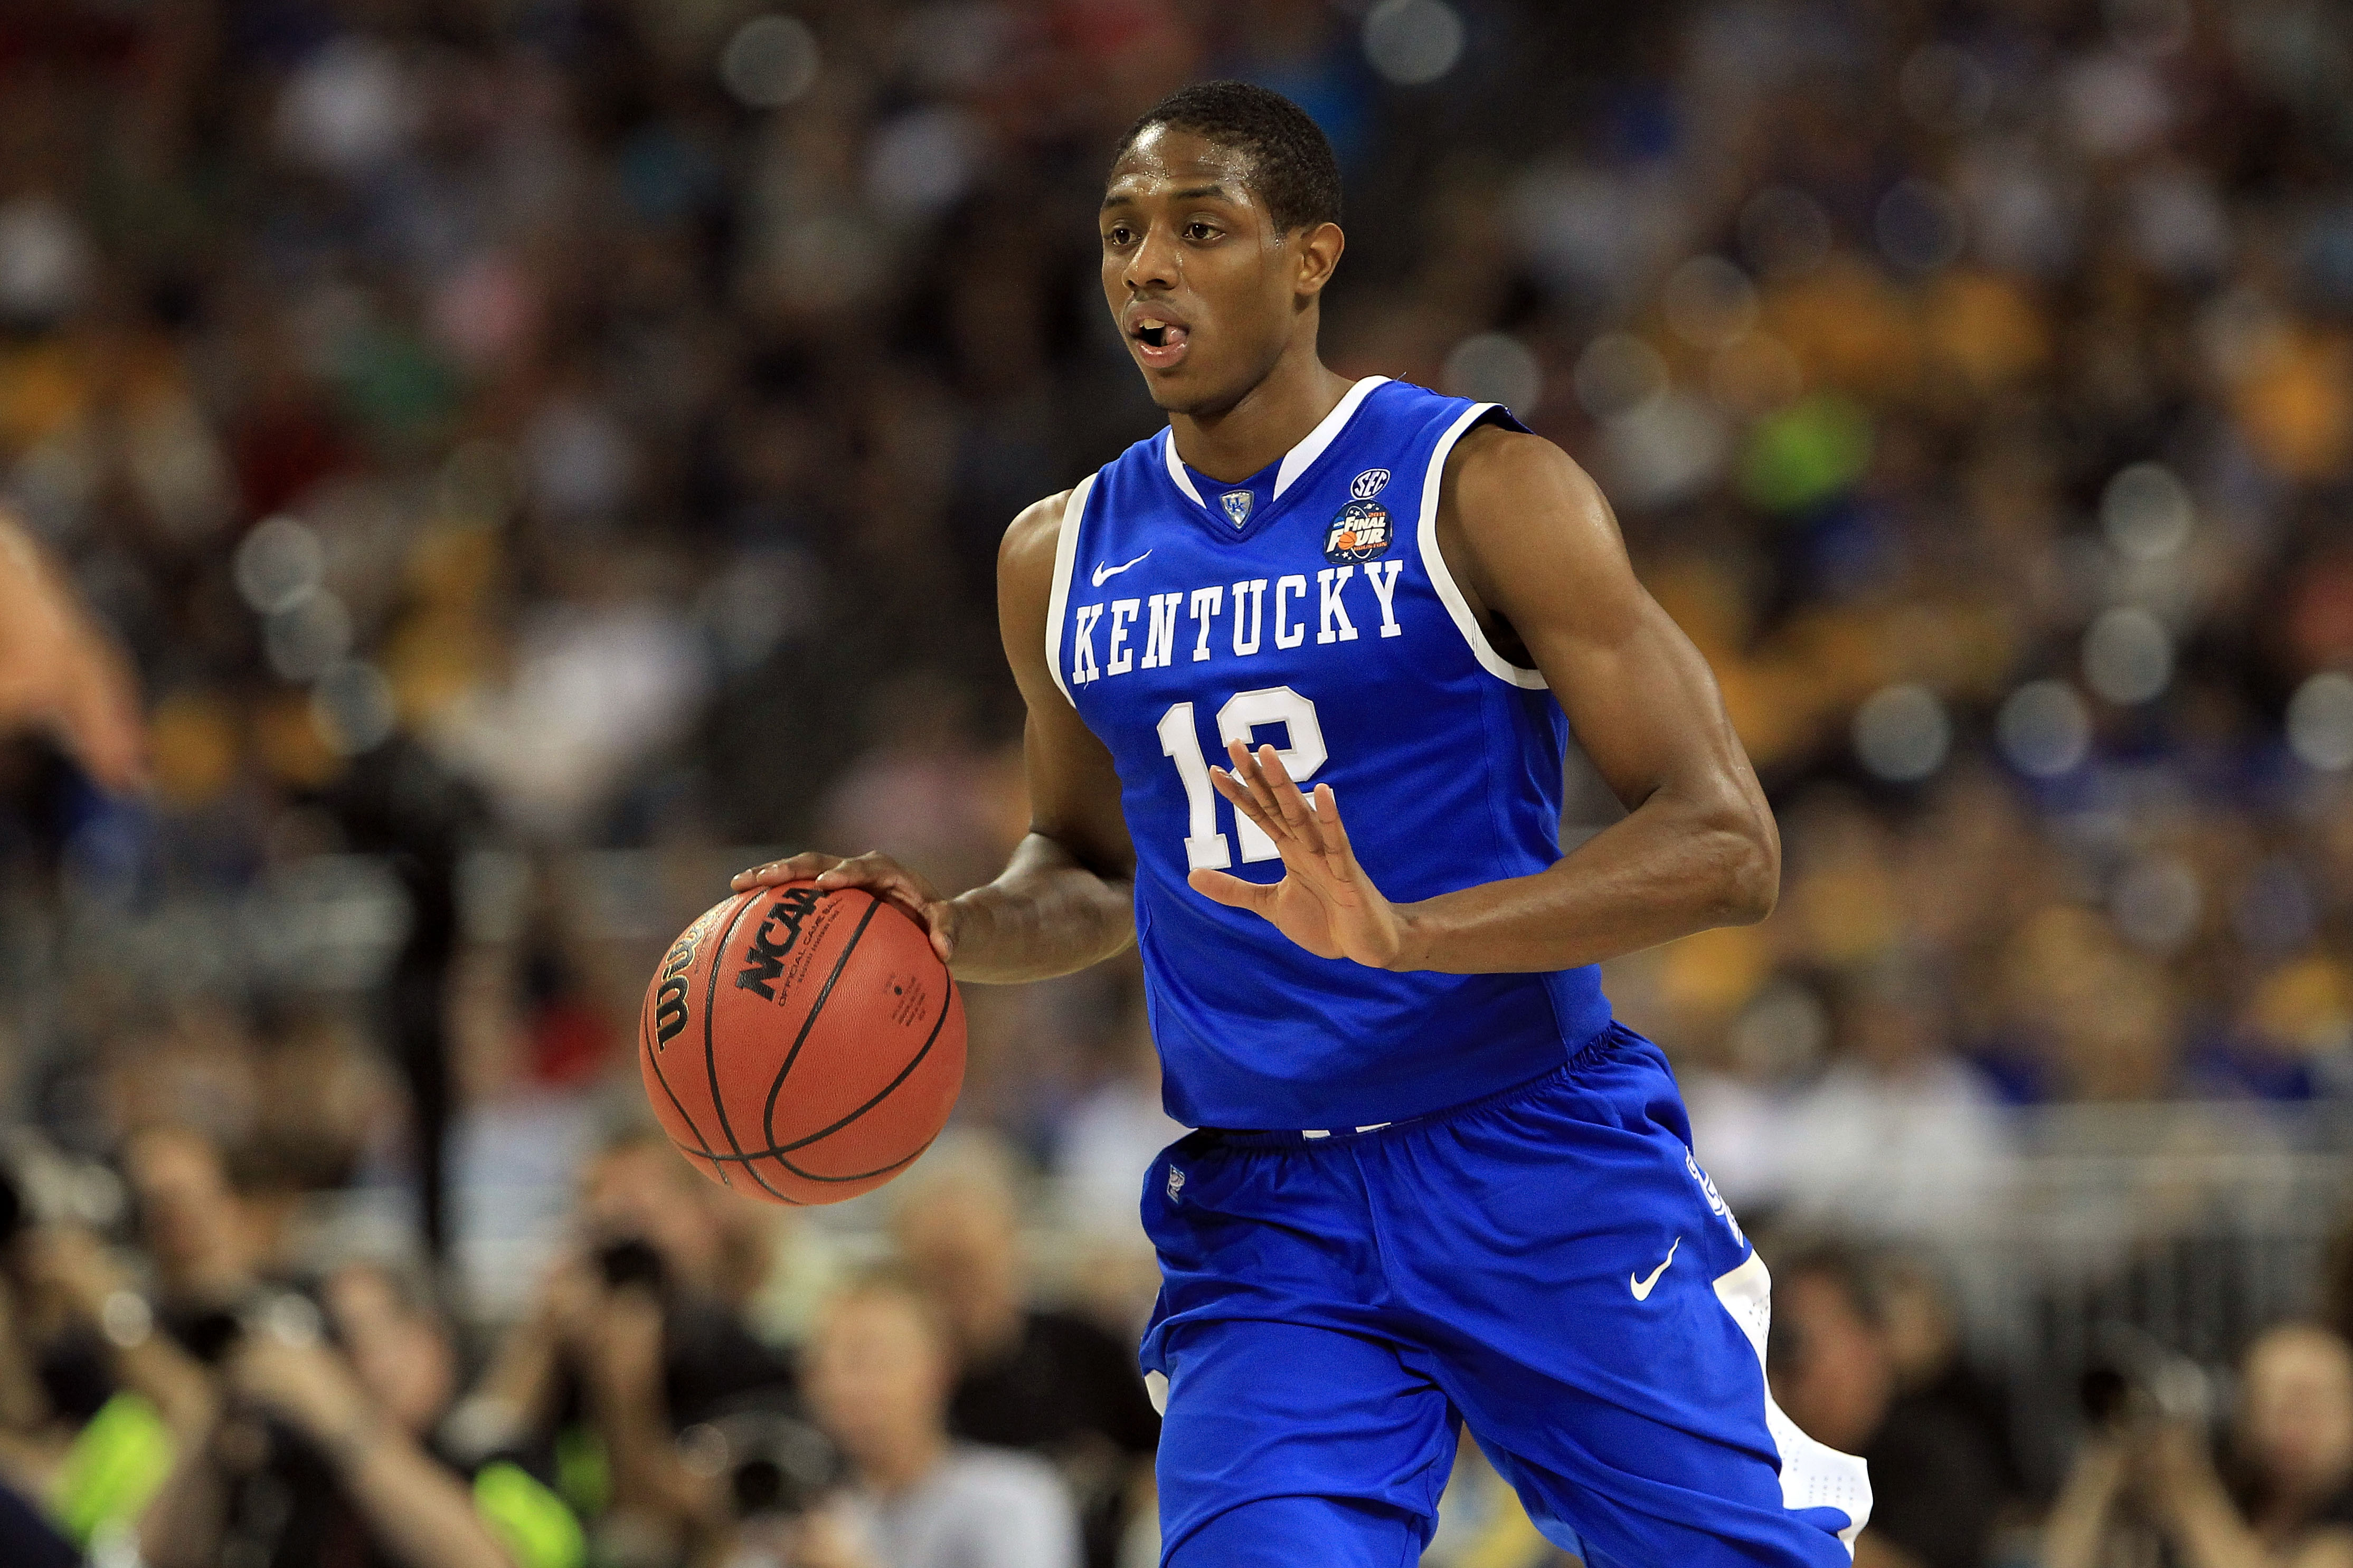 HOUSTON, TX - APRIL 02:  Brandon Knight #12 of the Kentucky Wildcats moves the ball while taking on the Connecticut Huskies during the National Semifinal game of the 2011 NCAA Division I Men's Basketball Championship at Reliant Stadium on April 2, 2011 in